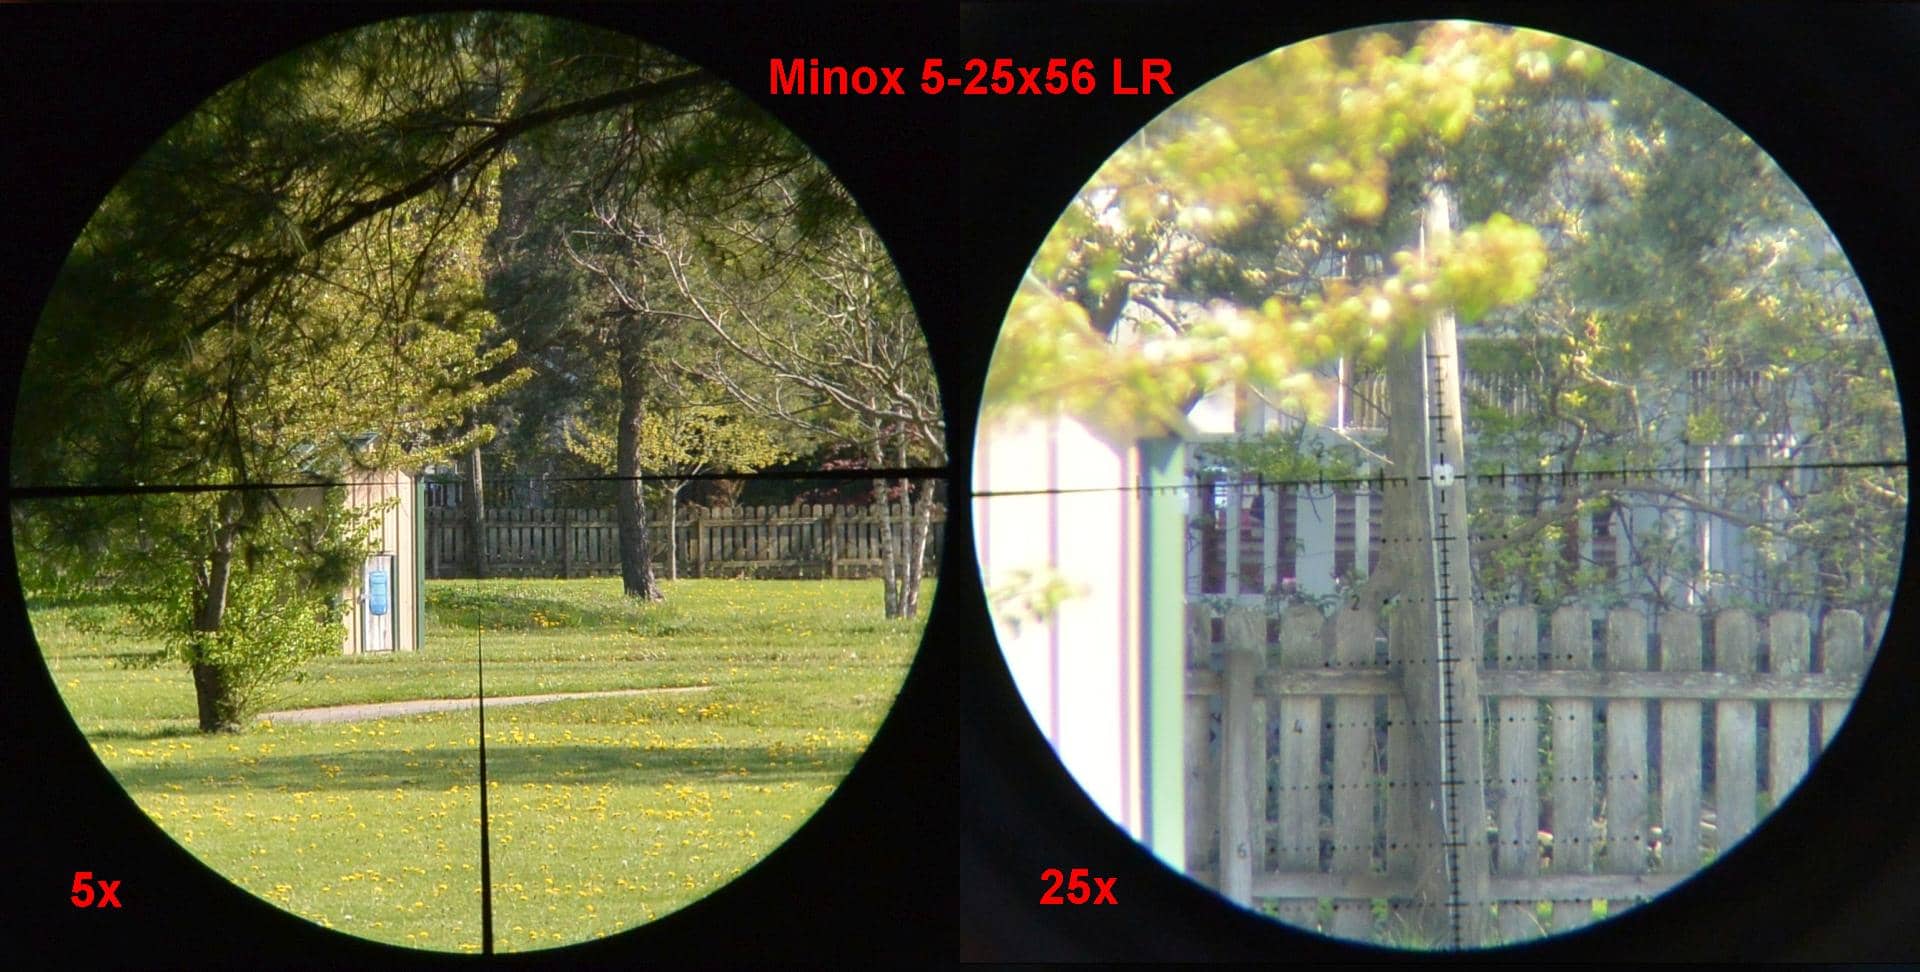 LR reticle in the Minox 5-25x56 LR  on low and high powers